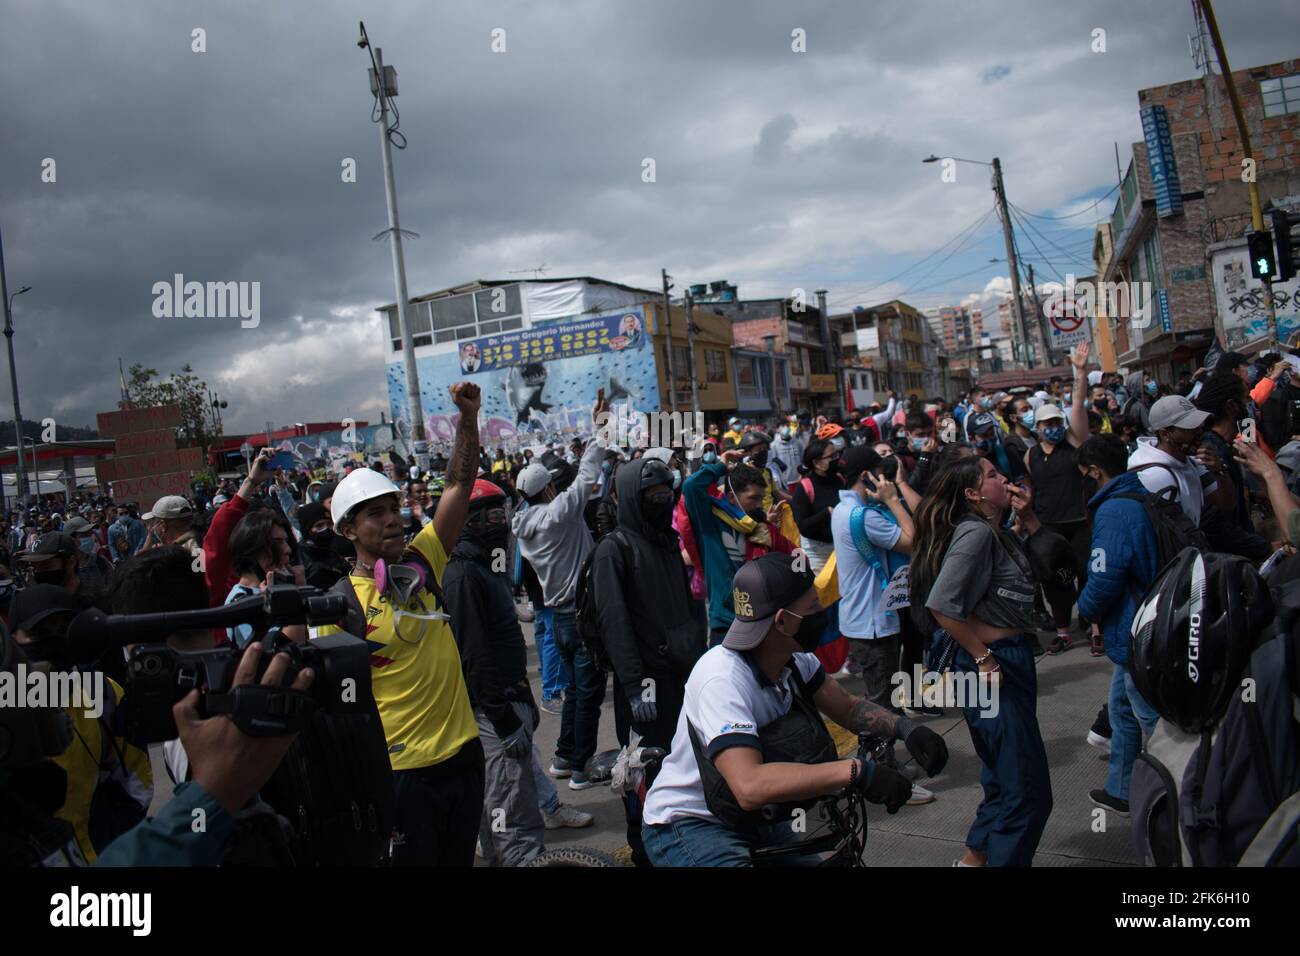 Bogota, Cundinamarca, Colombia. 28th Apr, 2021. Demonstrations rise against the tributary reform of president Ivan Duque on April 28, 2021, demonstrations rised to clashes between police and demonstrators. Credit: Daniel Santiago Romero Chaparro/LongVisual/ZUMA Wire/Alamy Live News Stock Photo